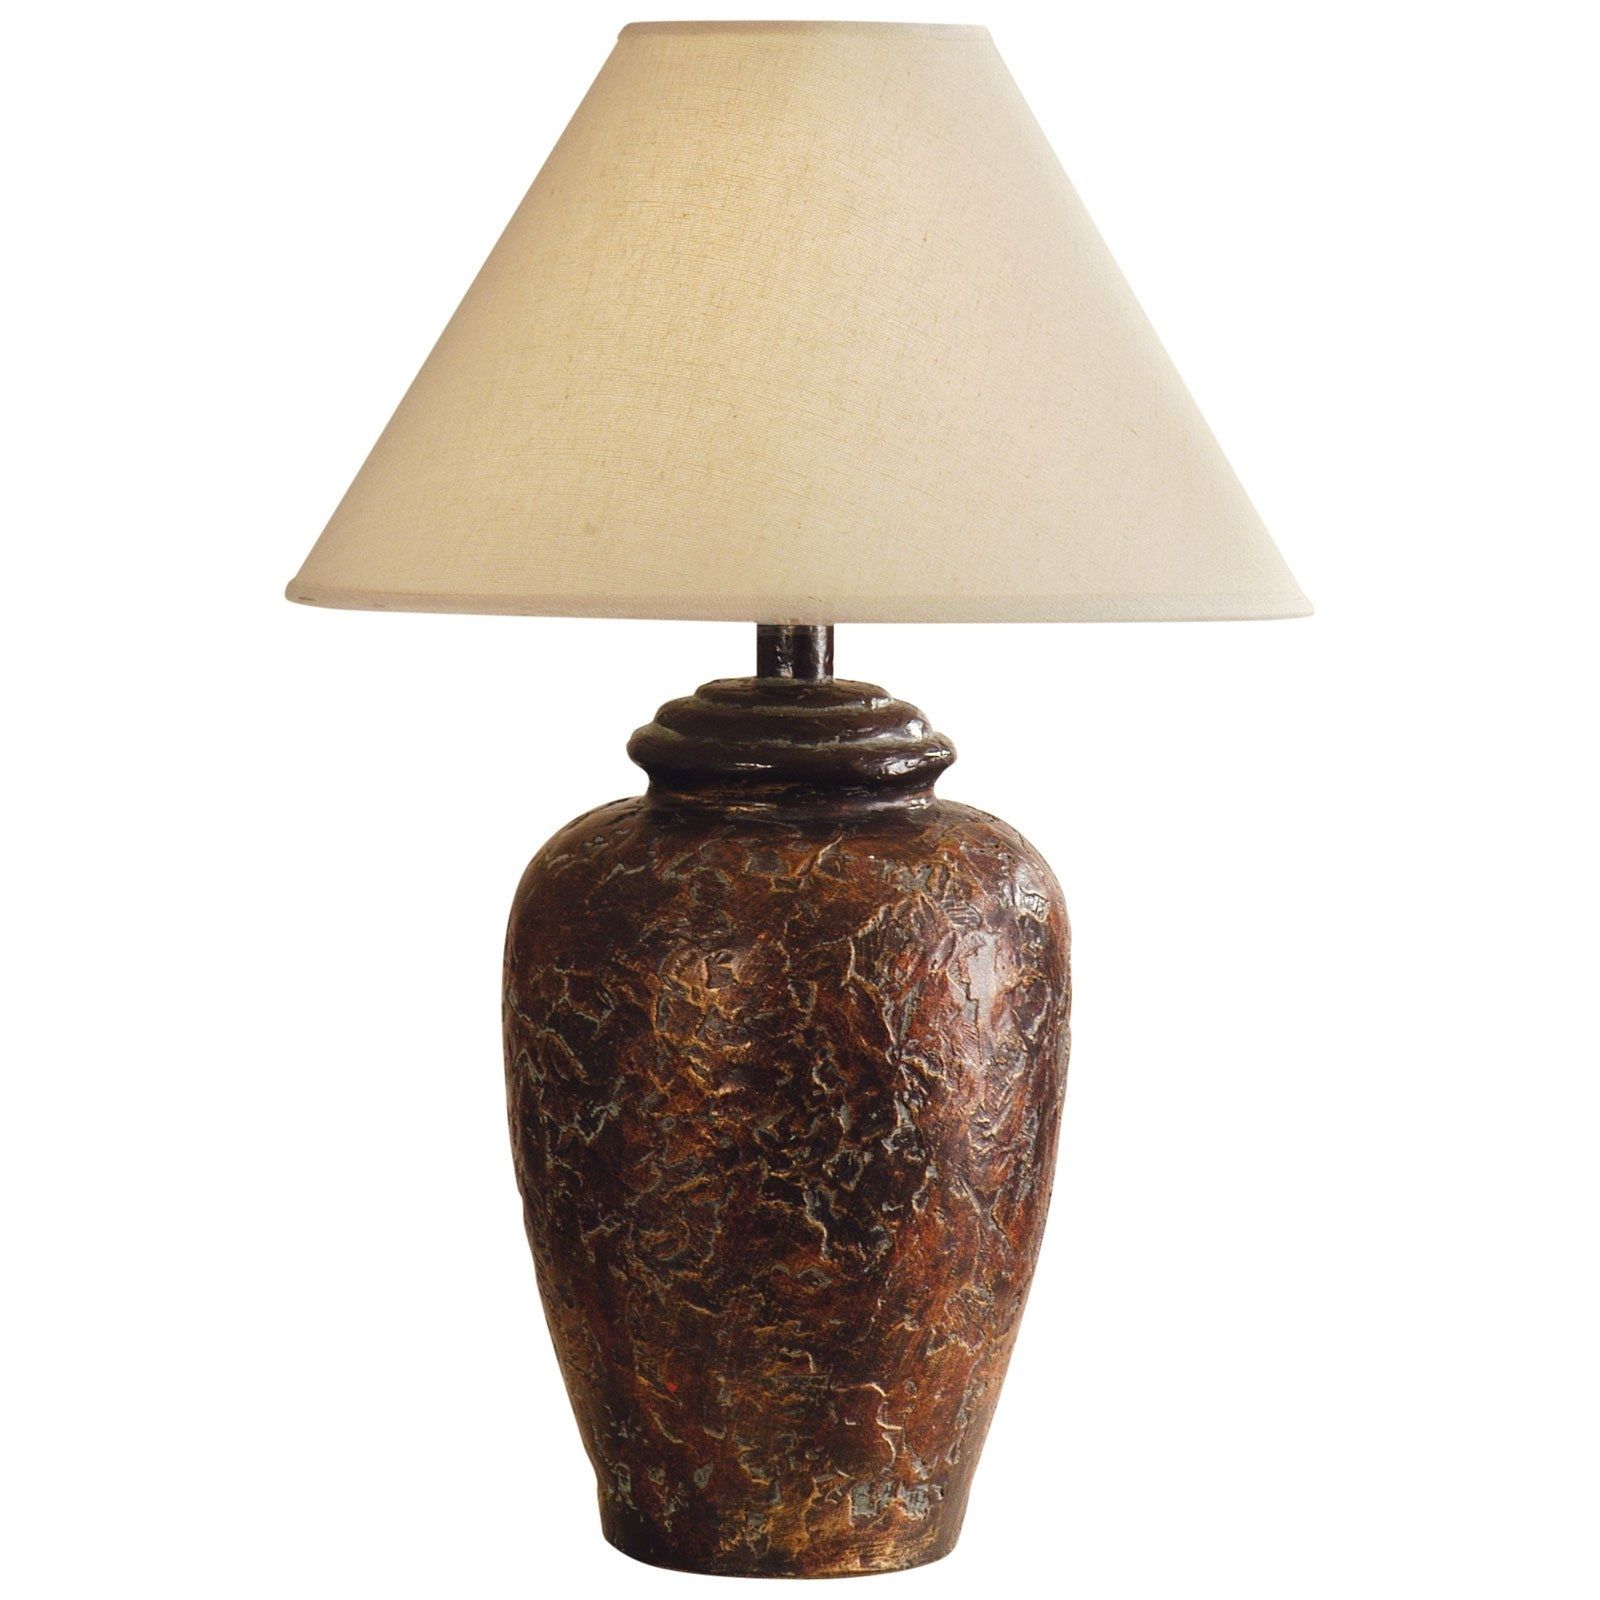 Furniture : Traditional Table Lamps Oregonuforeview Home Furniture Within Traditional Table Lamps For Living Room (View 8 of 15)